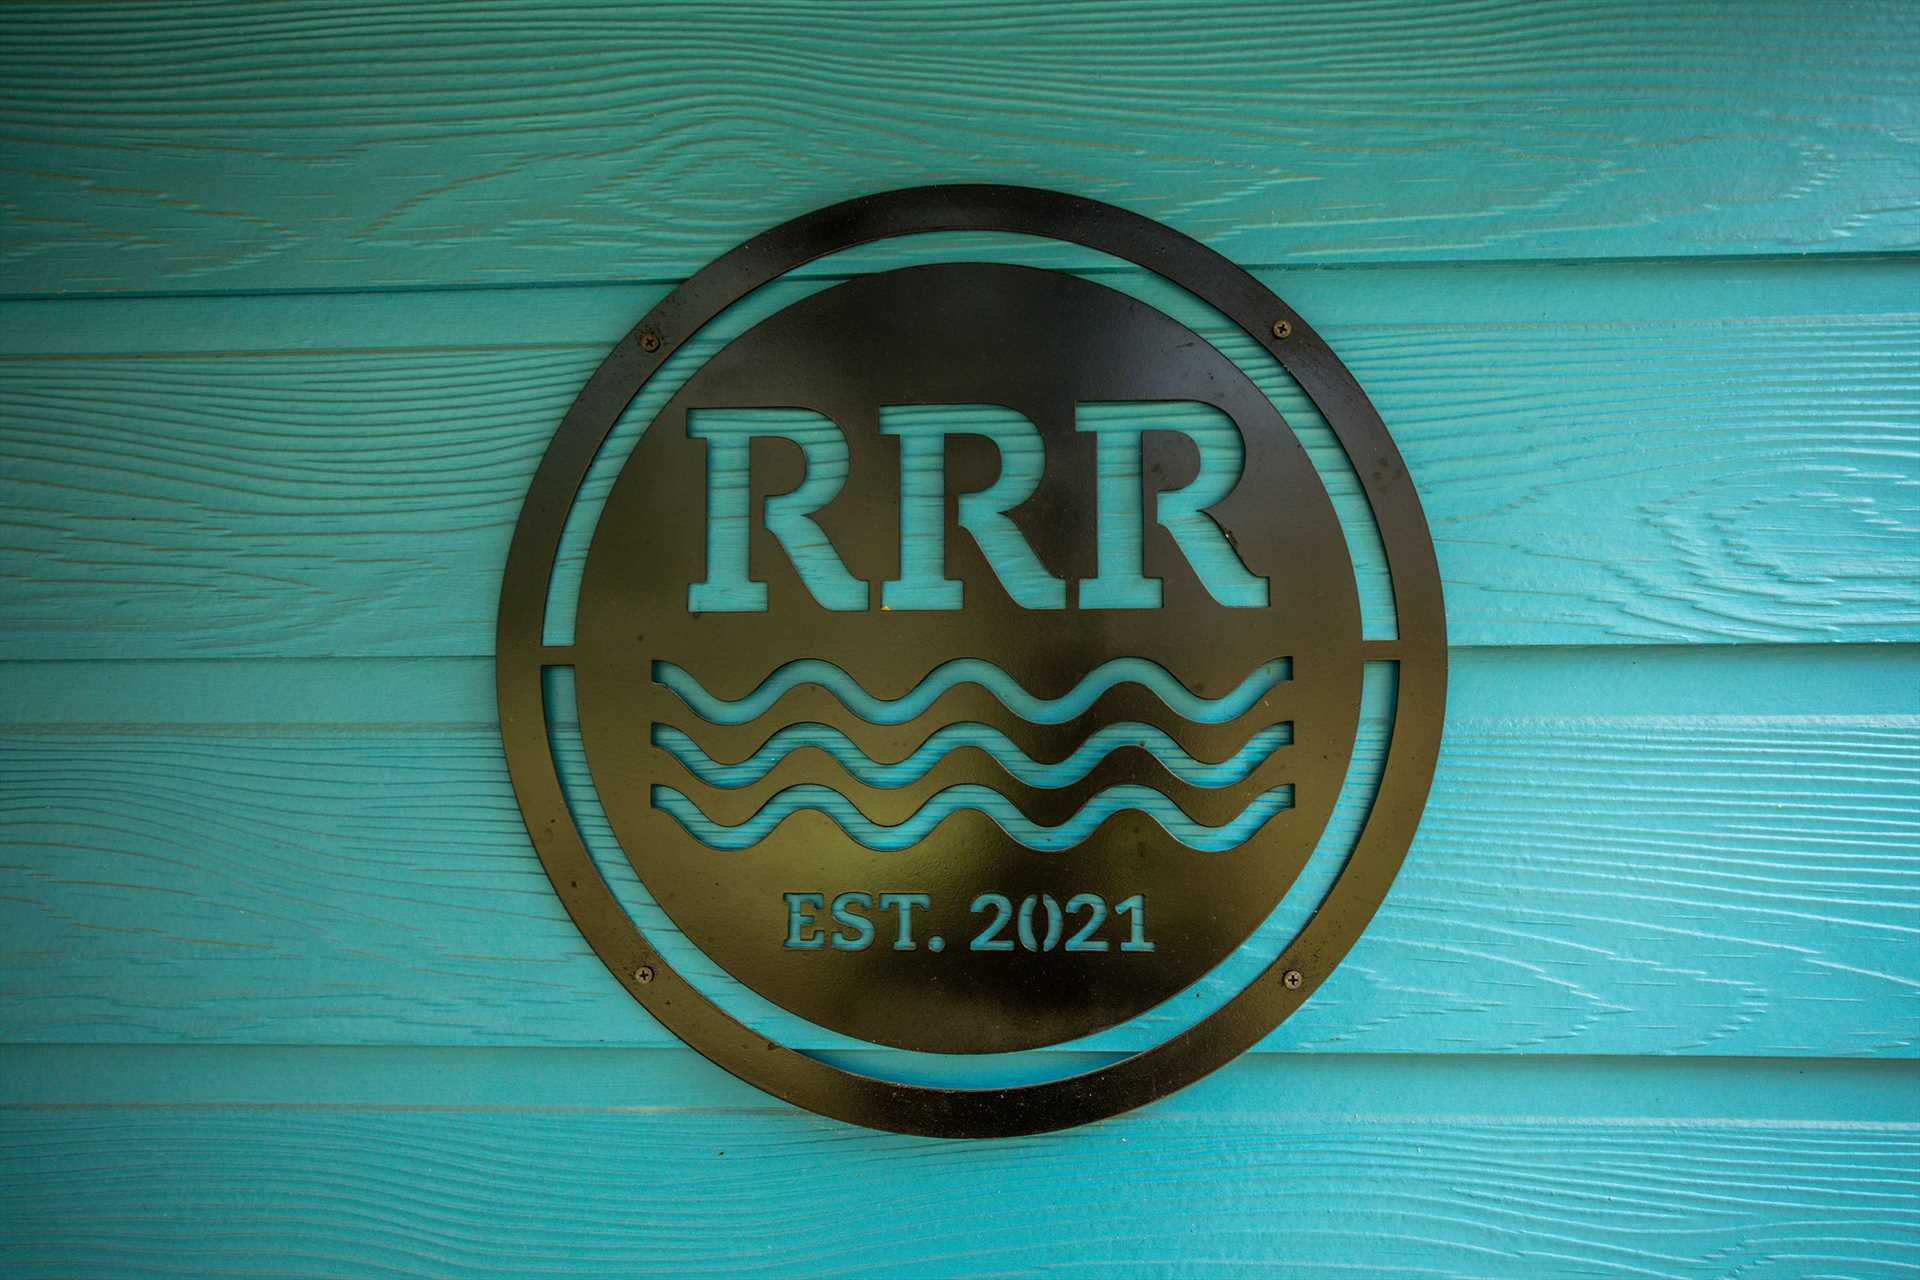                                                 Ever since its renovation, the River Rock Retreat has proven very popular. Book it today and find out why!